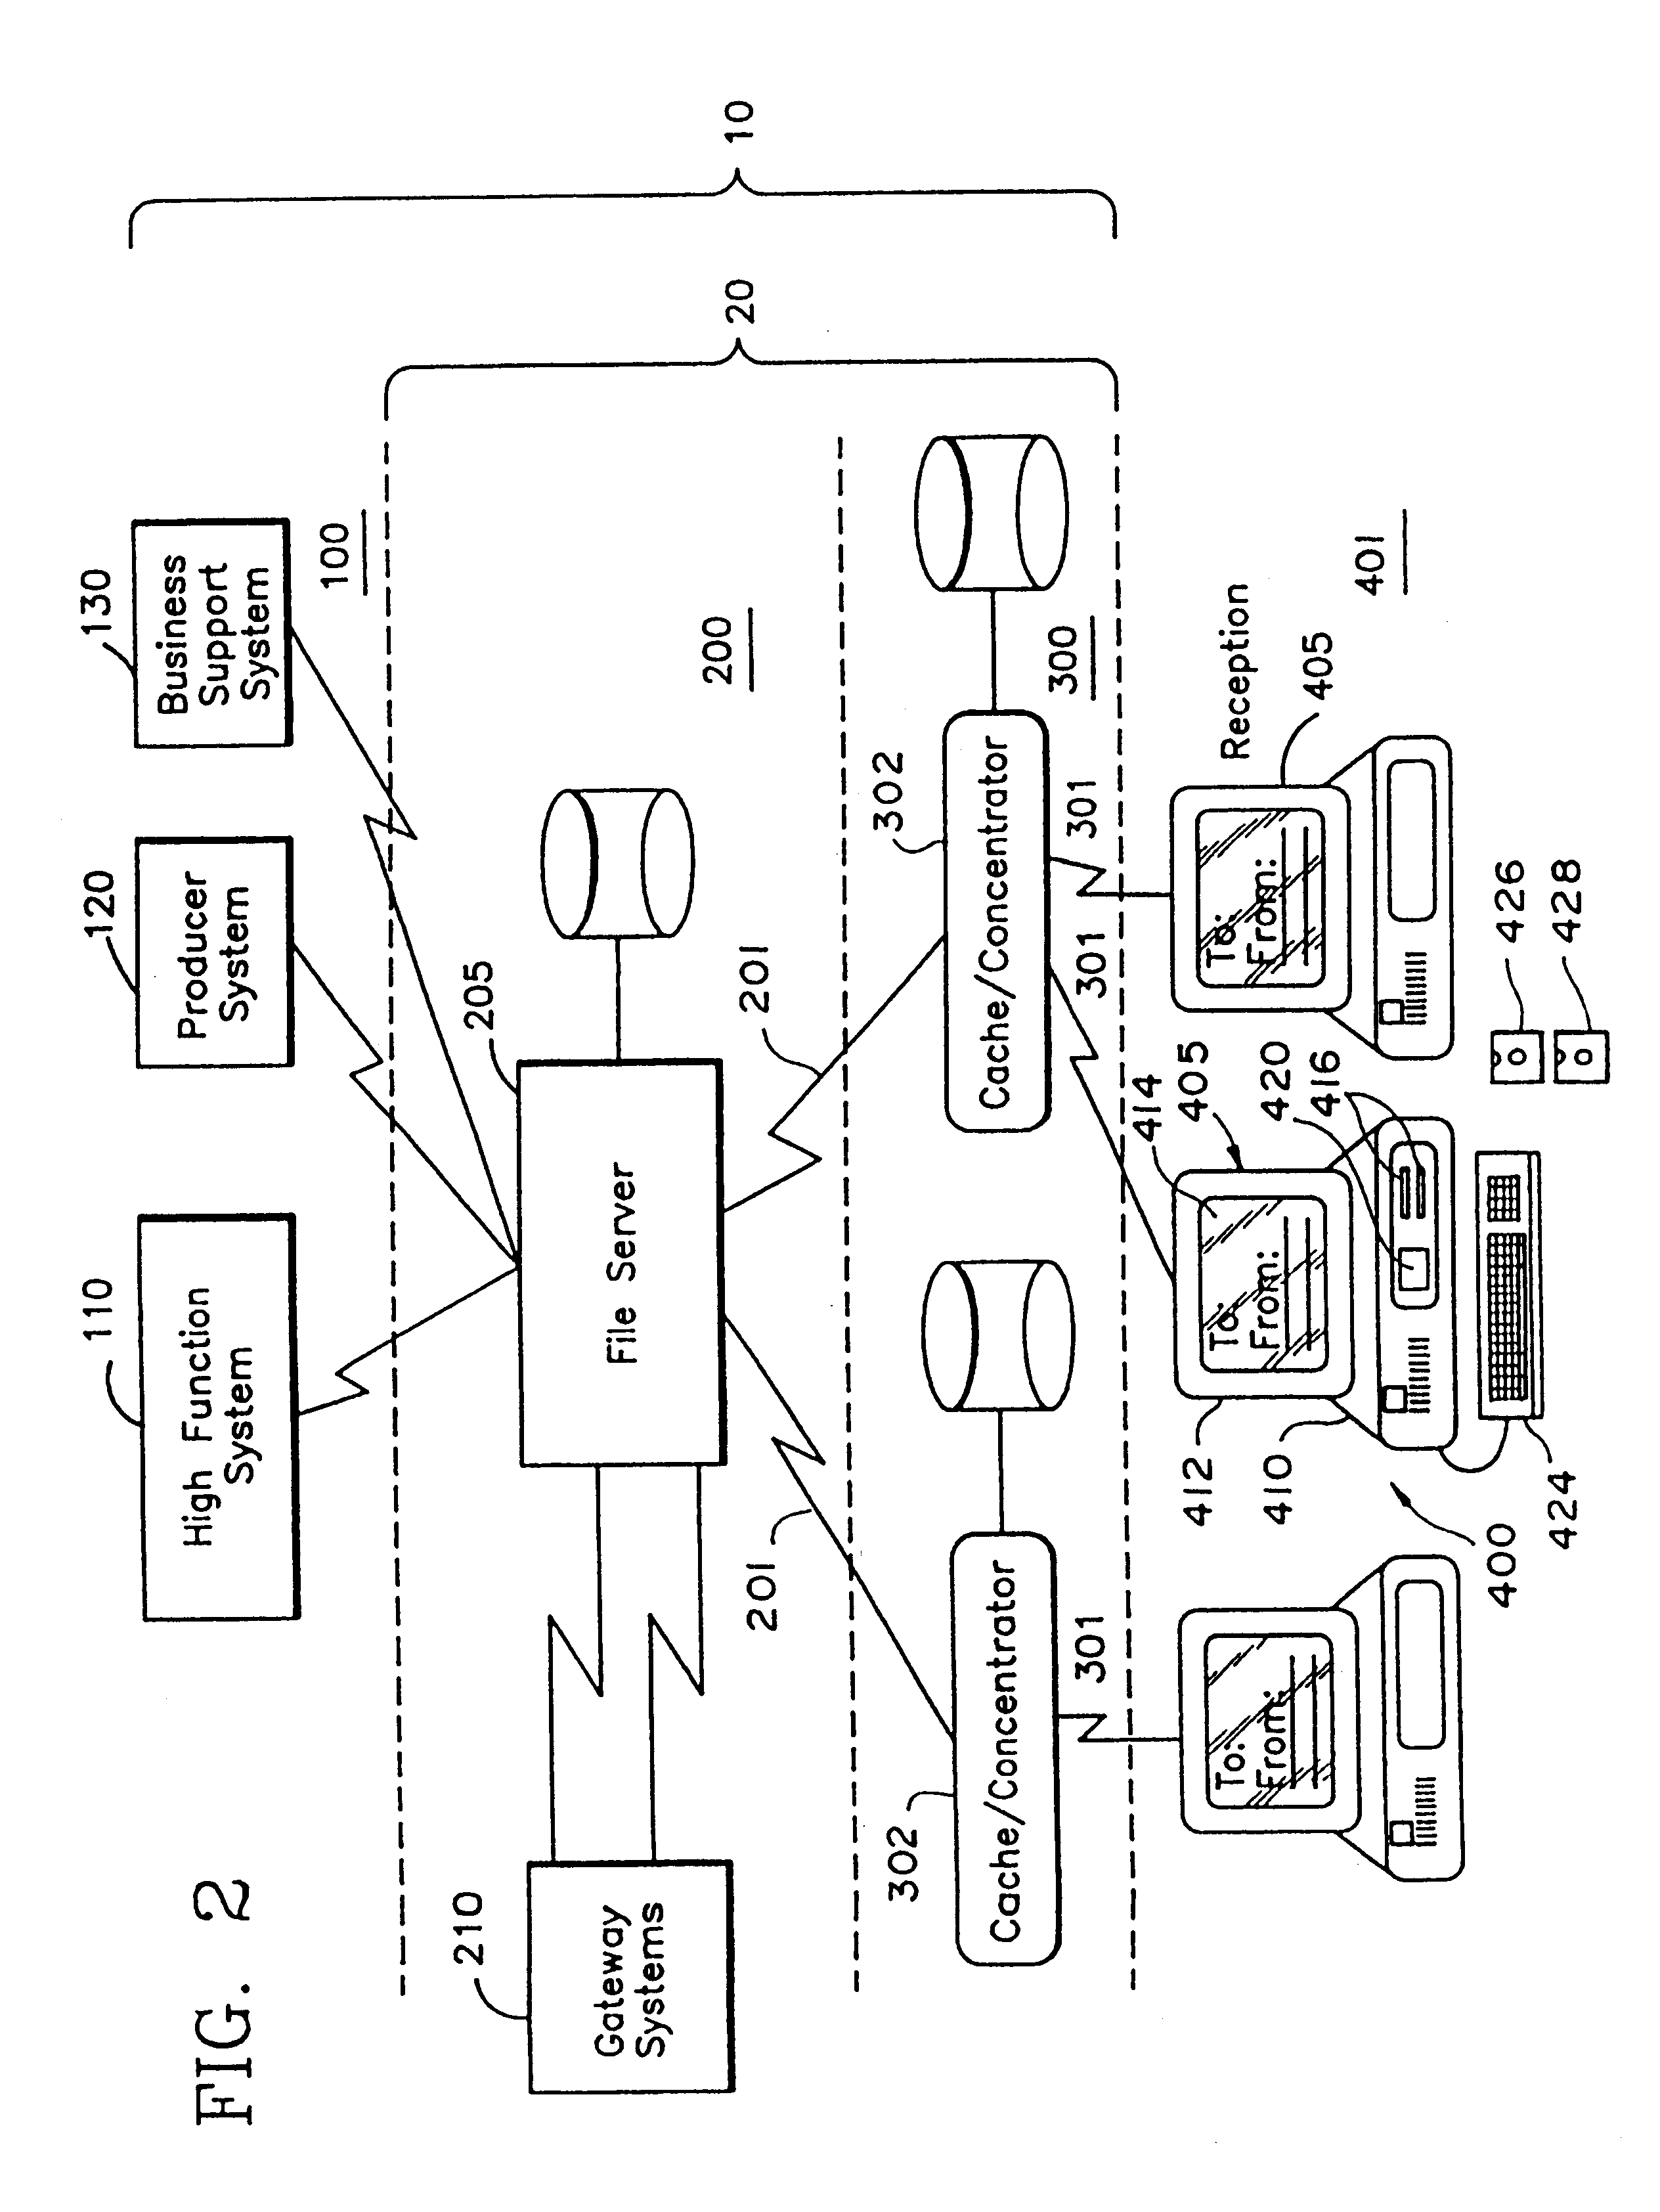 Method for locating application records in an interactive-services database